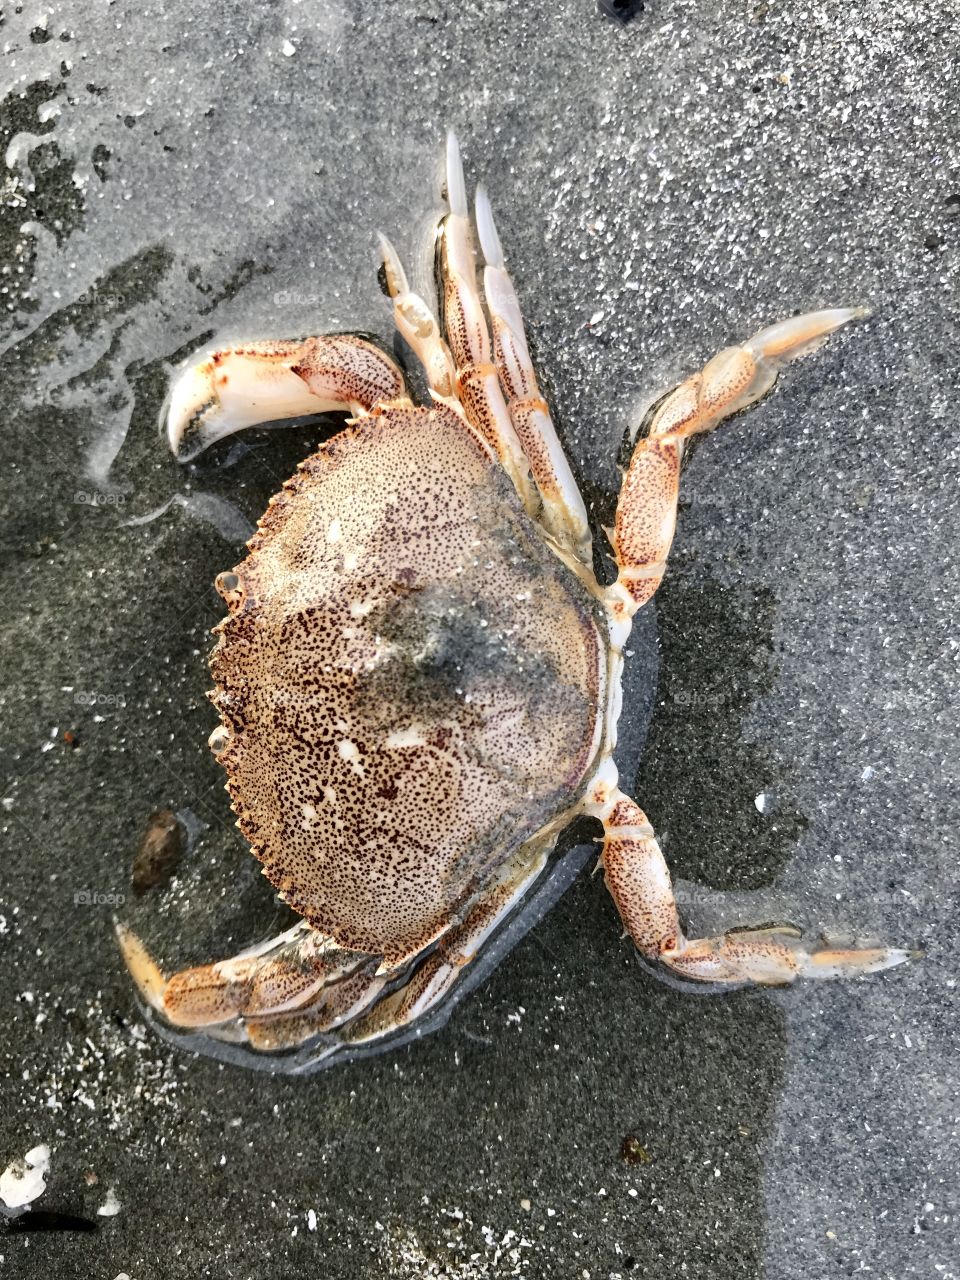 Orange Pacific Ocean crab washed up on Tofino, BC sandy beach during high tide.